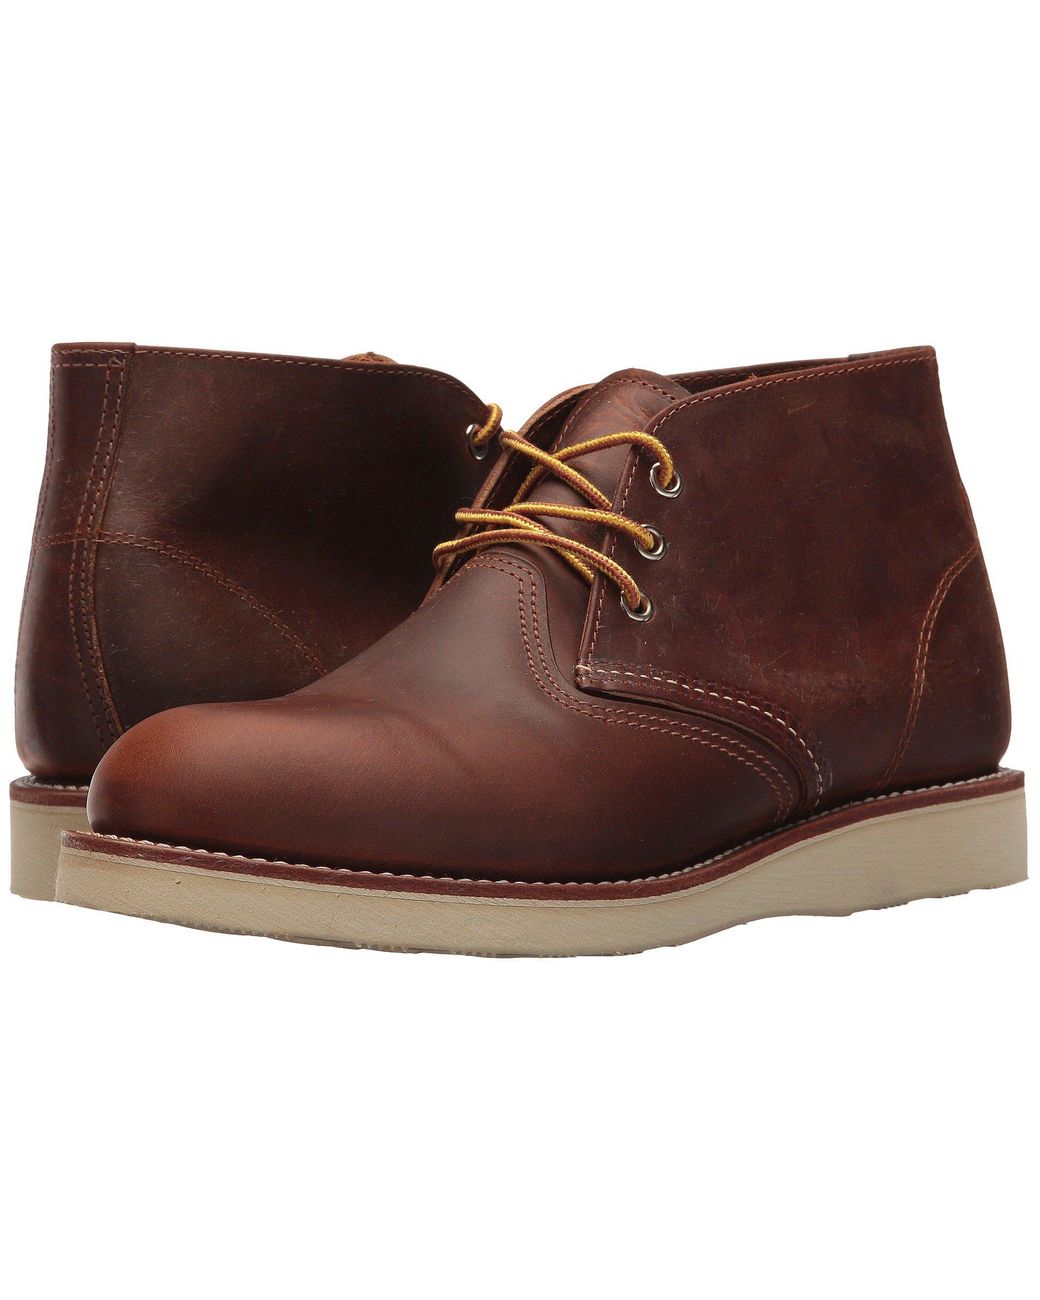 Red Wing Suede Work Chukka in Tan (Brown) for Men - Save 15% - Lyst